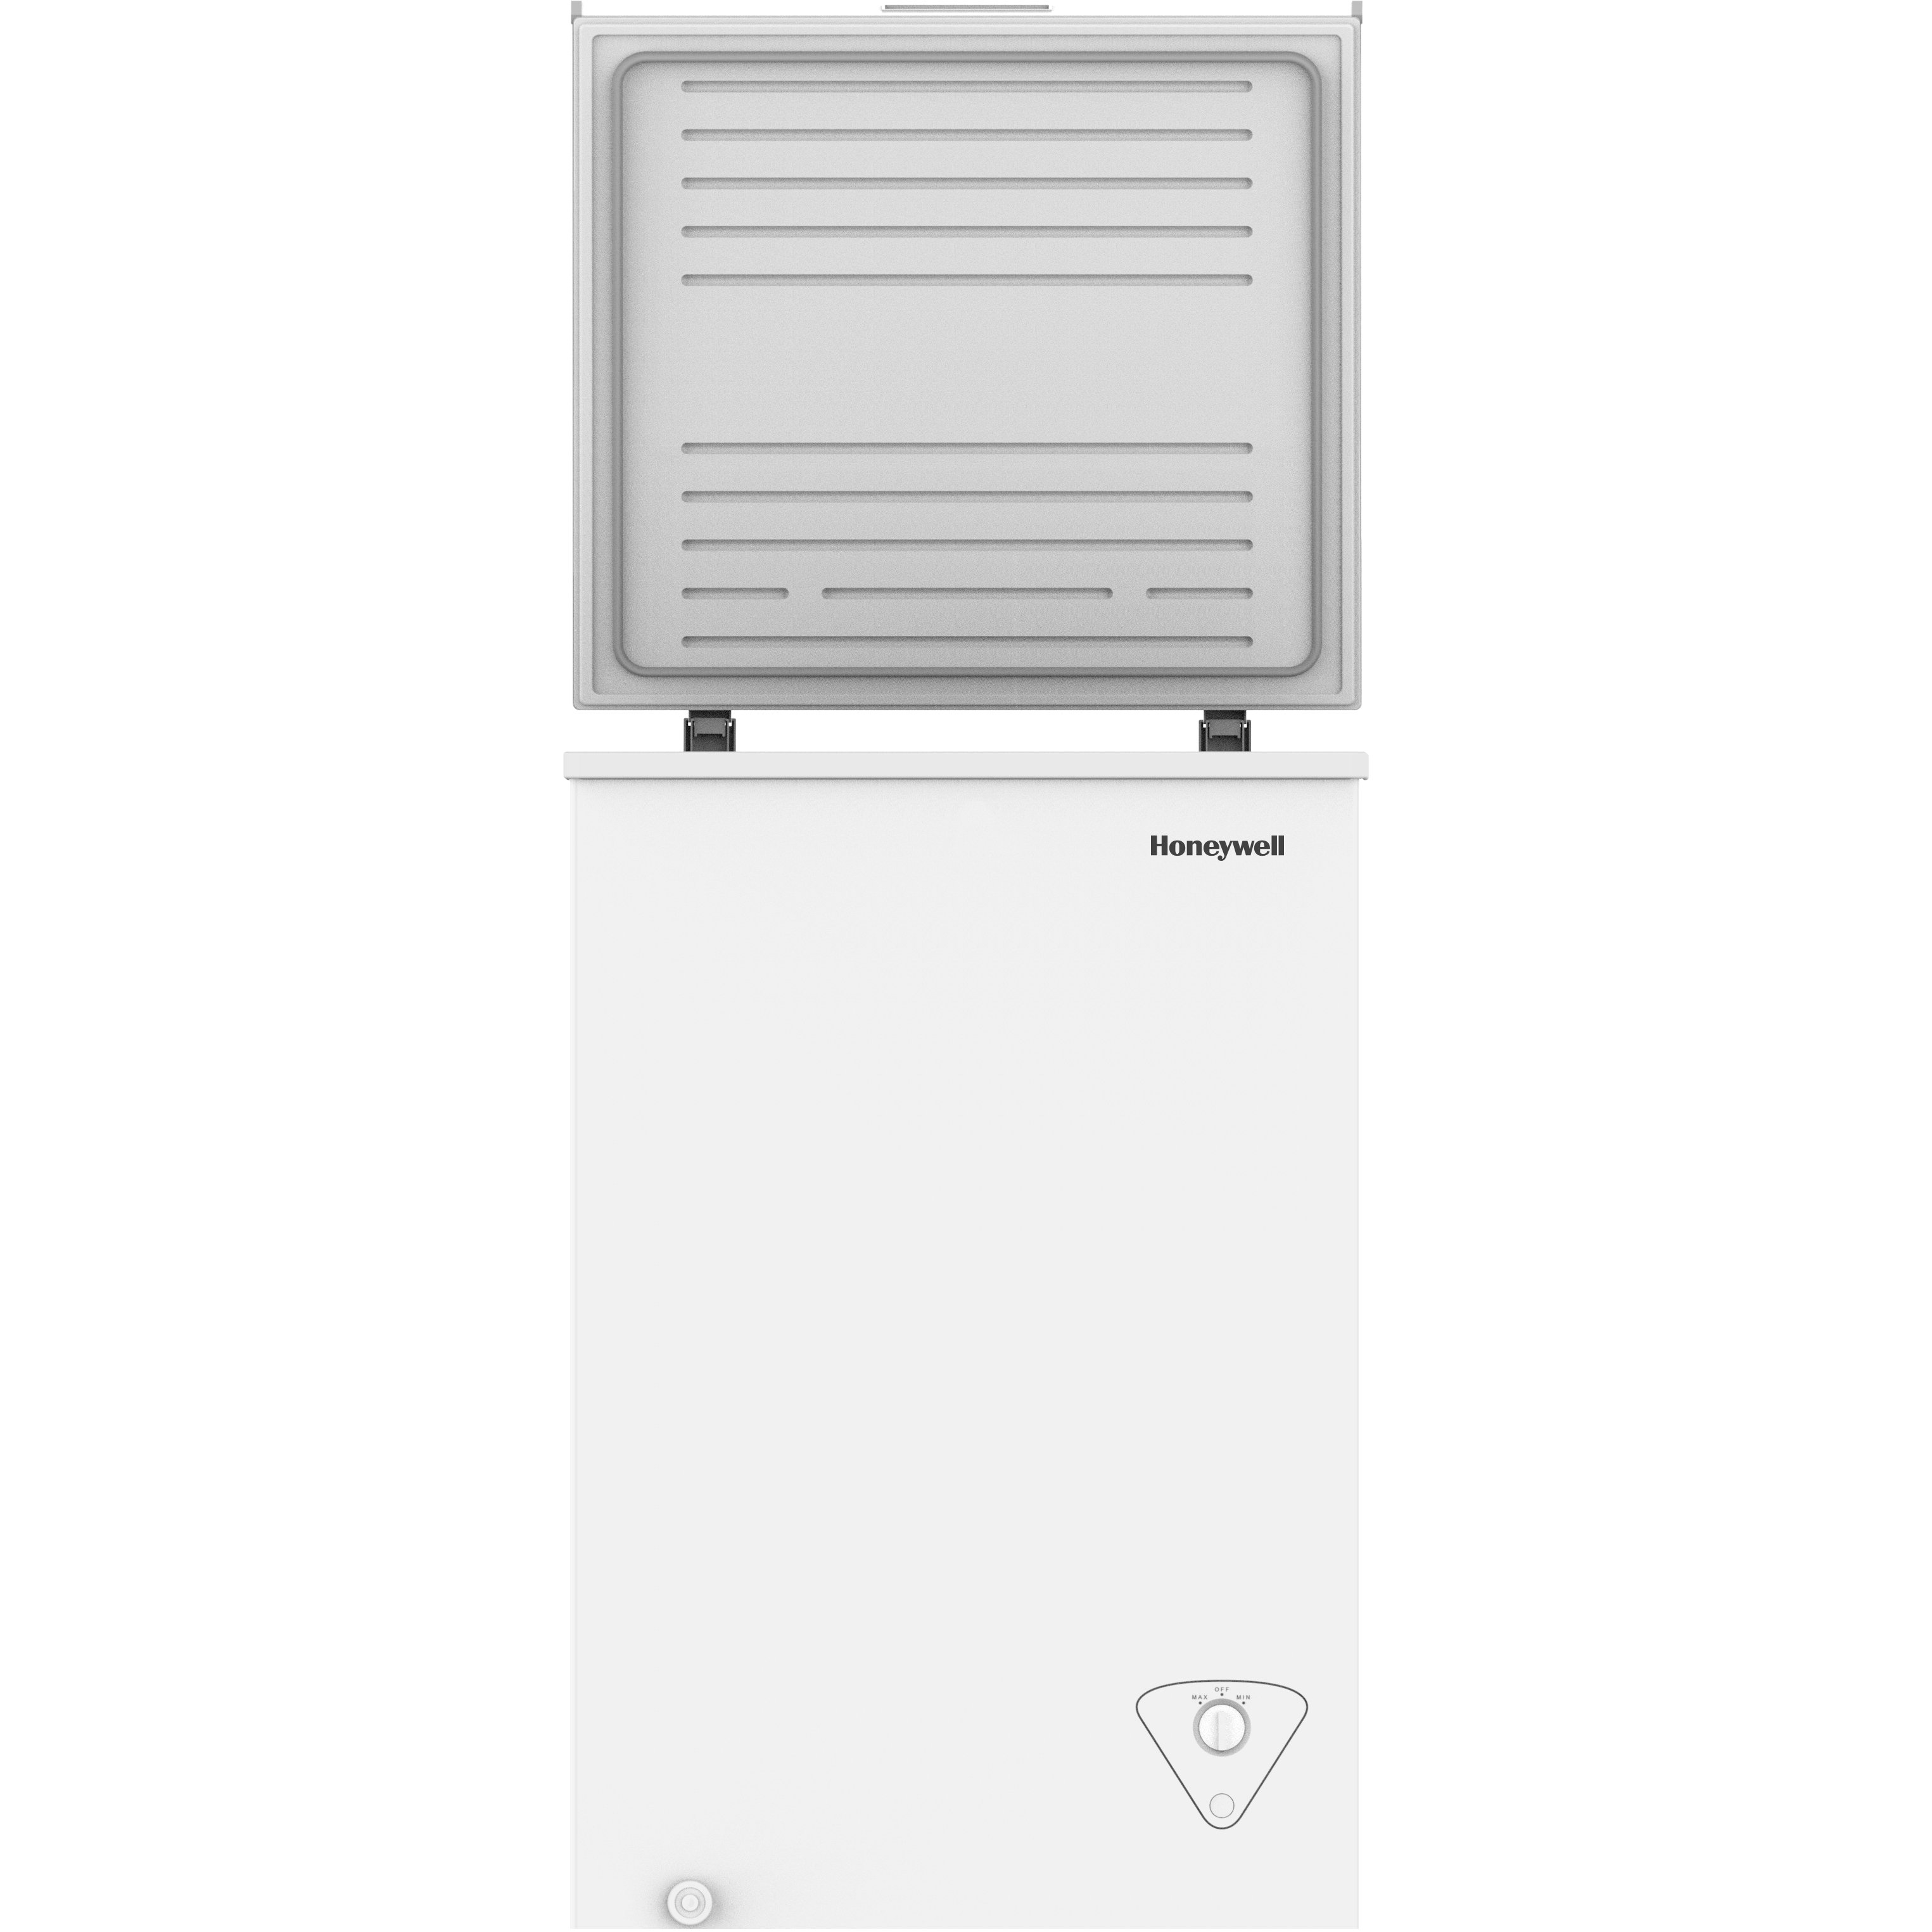 Honeywell 3.5 Cu Ft Chest Freezer with Removable Storage Basket, White -  H35CFW